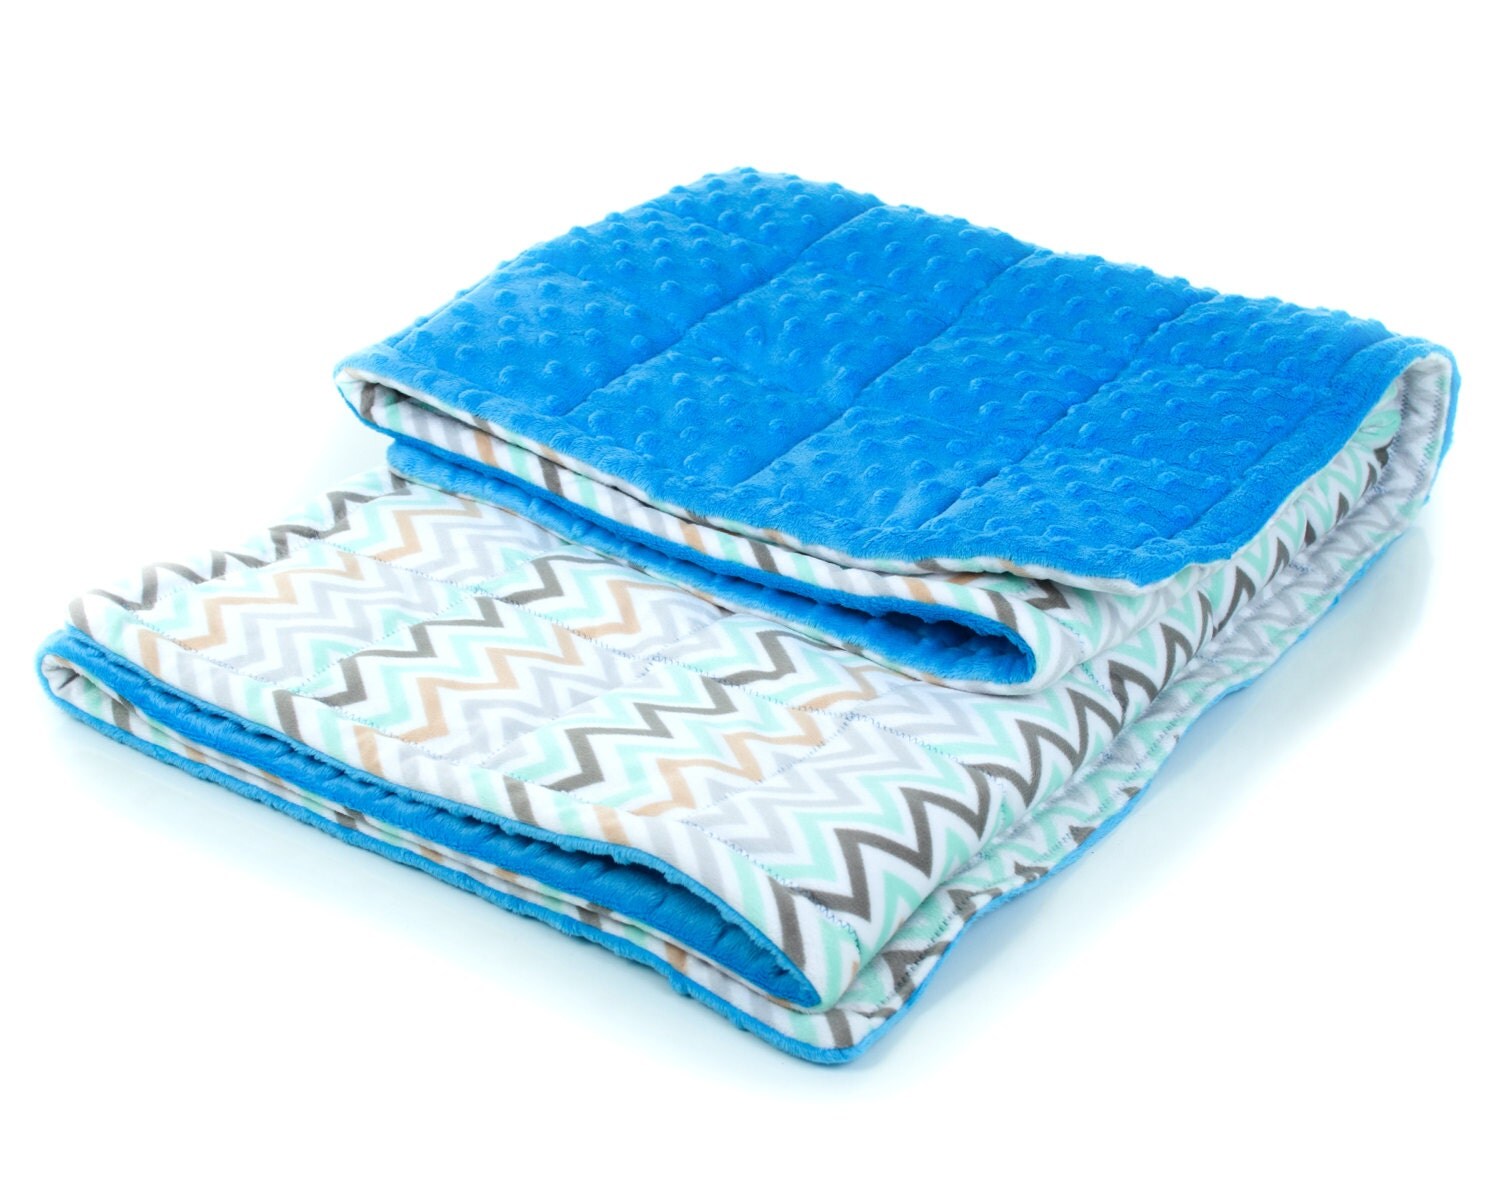 Minky weighted blanket 3lb 4 lb 5 lb 6 lb by EverythingSensoryCO